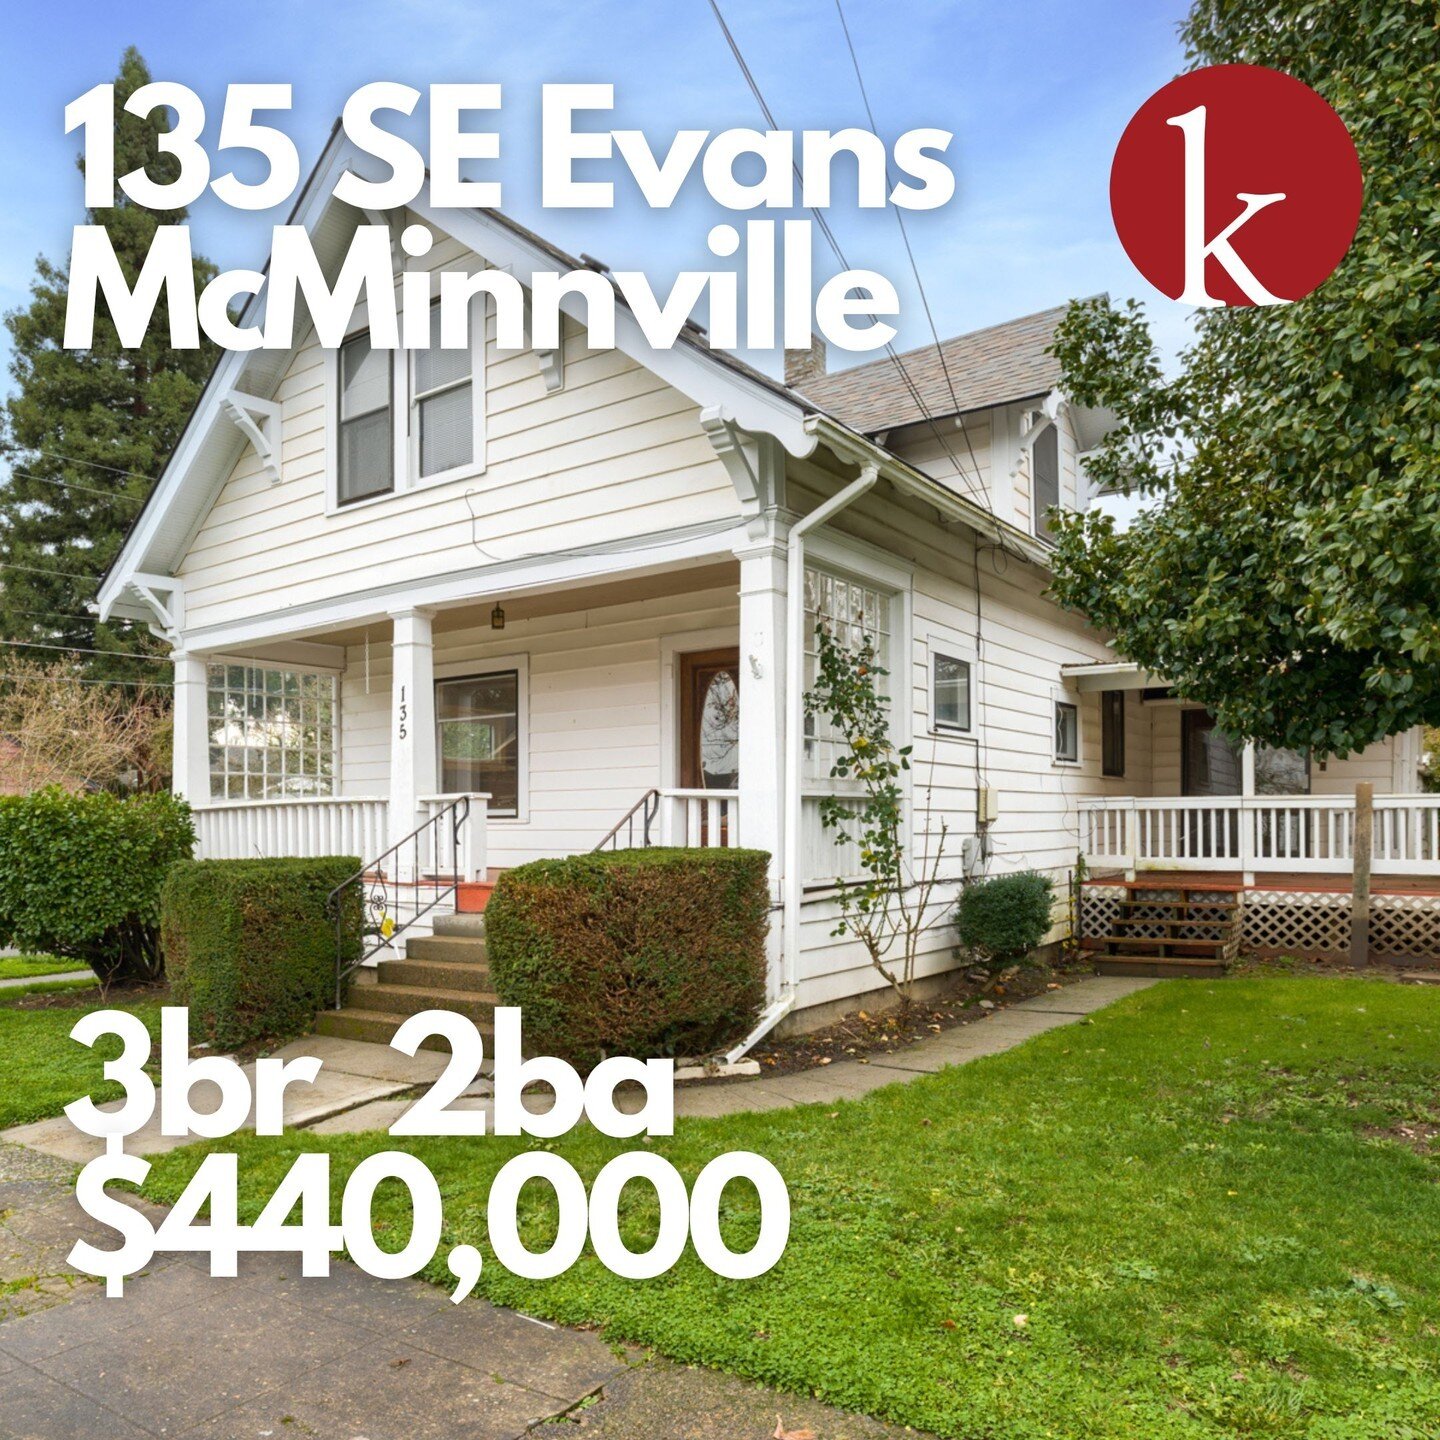 135 SE EVANS ST, MCMINNVILLE
-3br 2ba 2344sf -
ㅤ
Built in 1919 boasting original charm and architectural character. The large front porch invites you in with its classic appeal.
ㅤ
The formal living room and dining room feature hardwood floors and abu